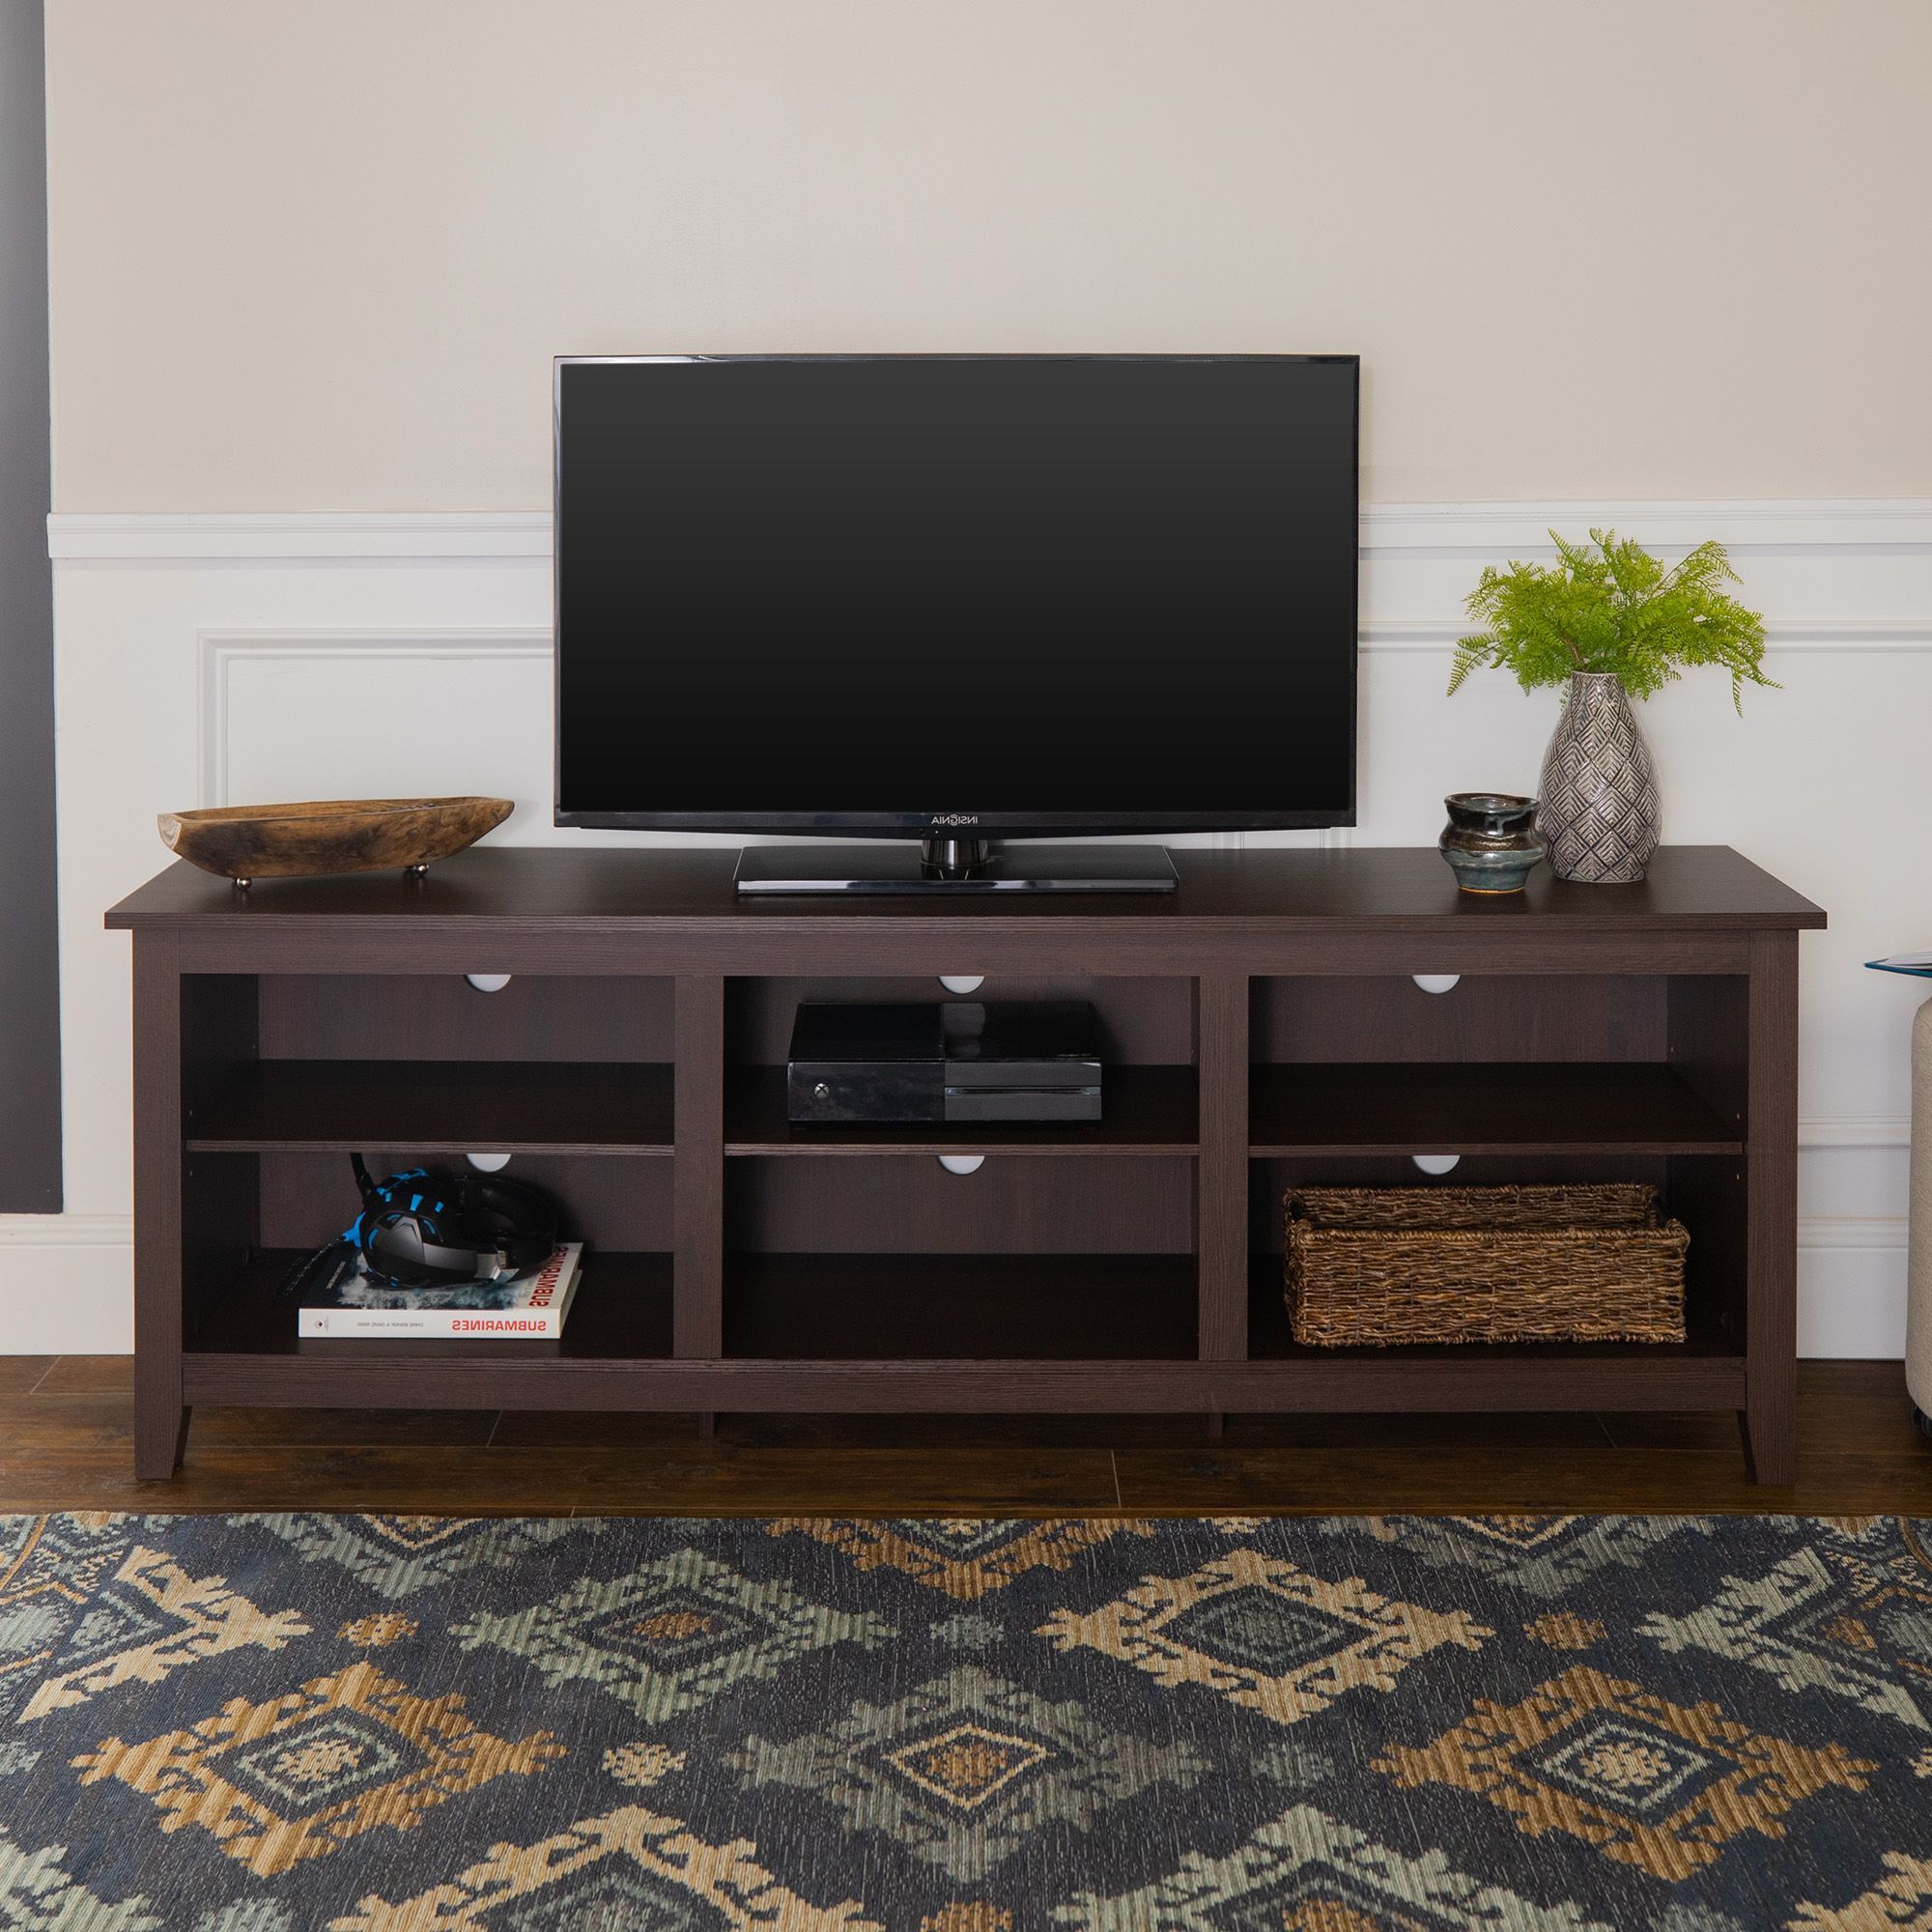 Walker Edison Wood Tv Media Storage Stand For Tvs Up To 70" – Espresso Intended For Widely Used 110" Tvs Wood Tv Cabinet With Drawers (View 4 of 15)